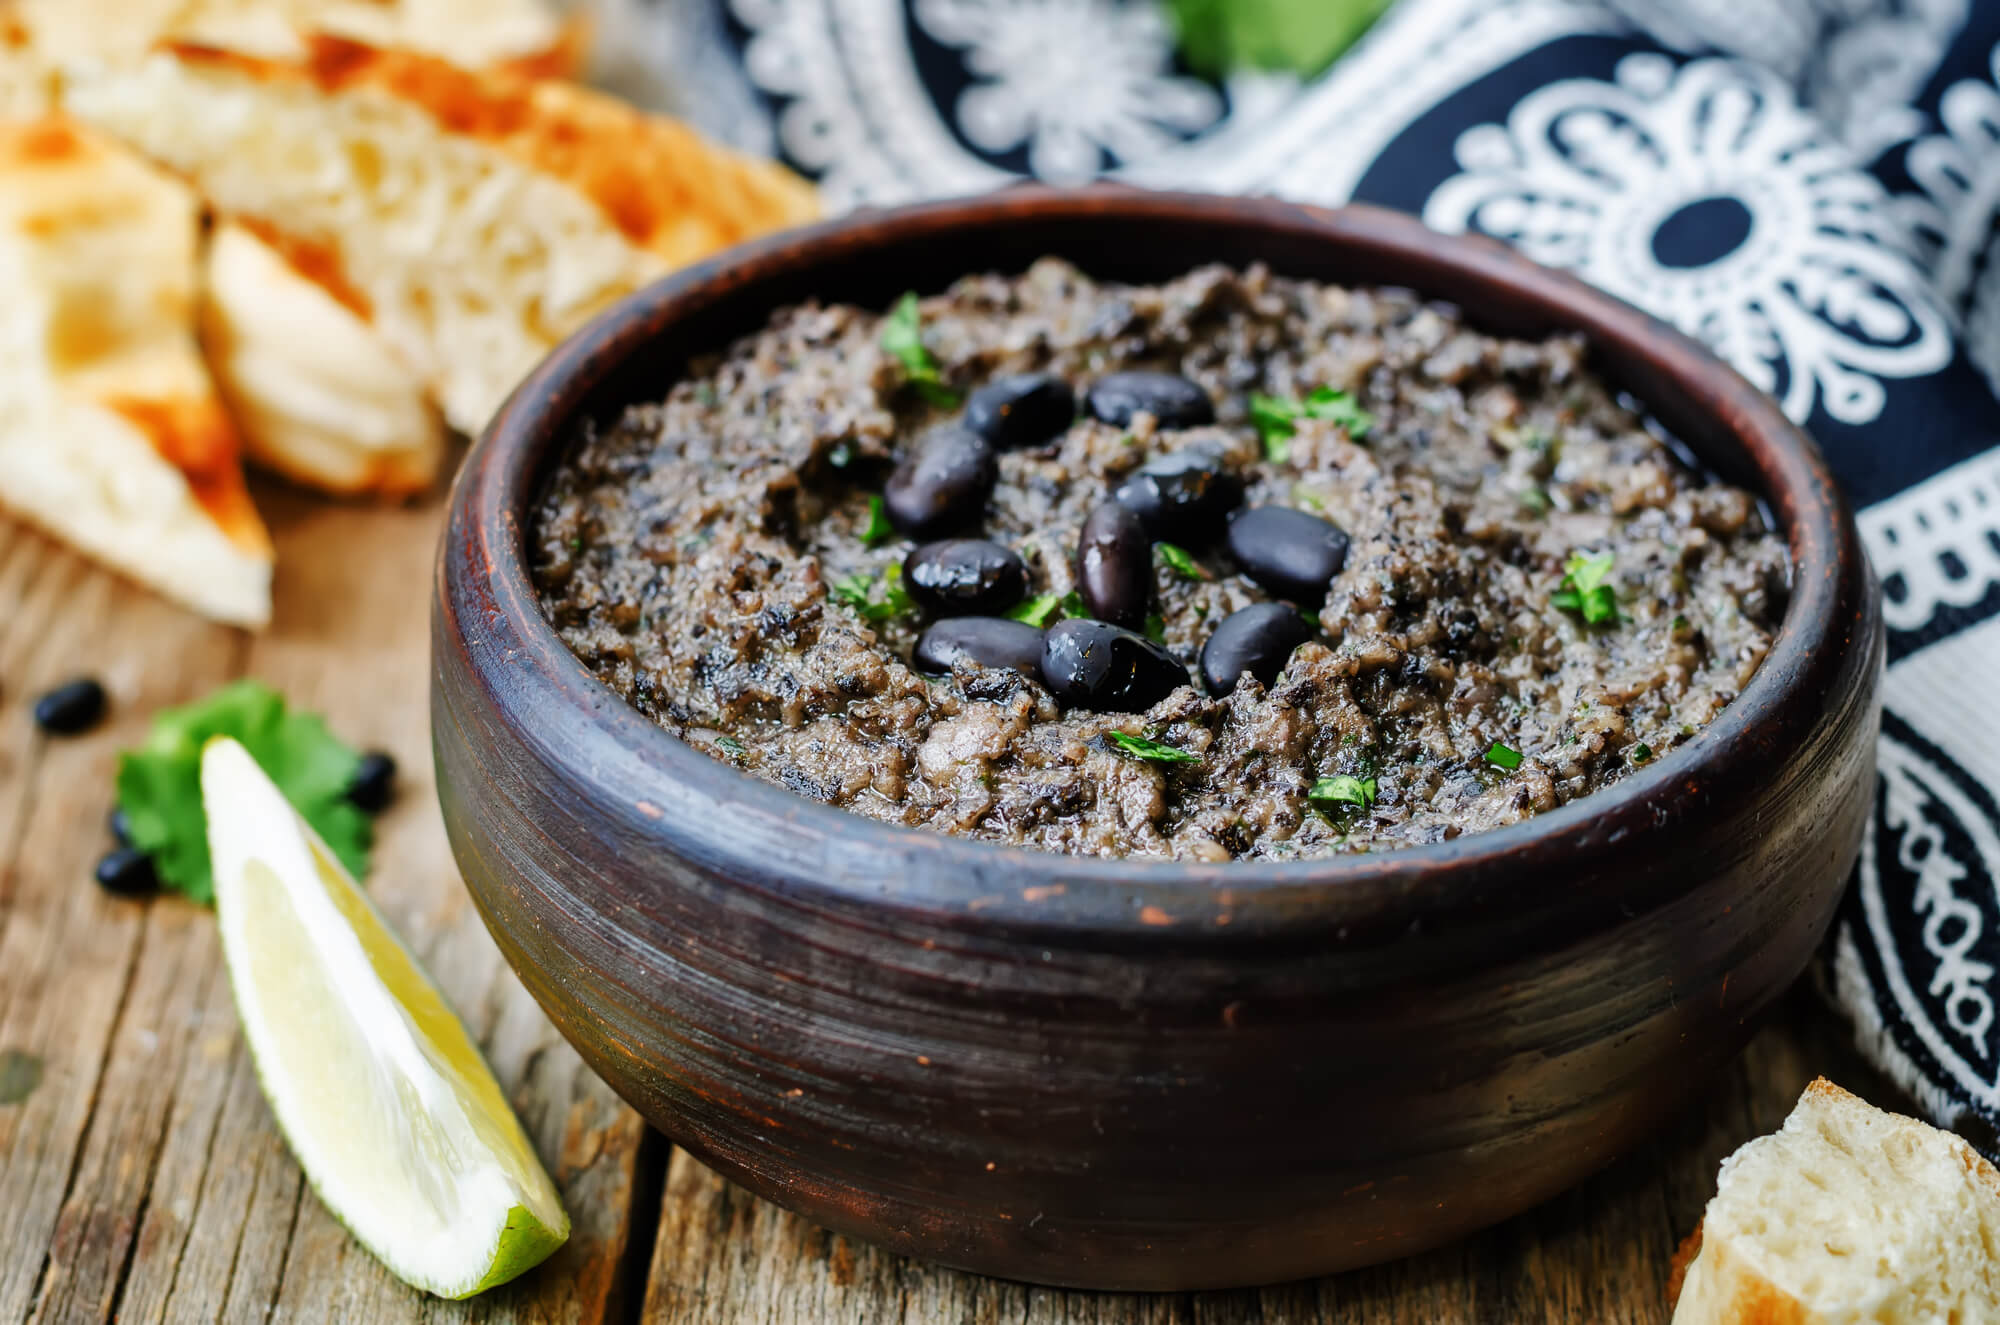 Spicy Black Bean Hummus with black beans and cilantro in a wooden bowl with bread.